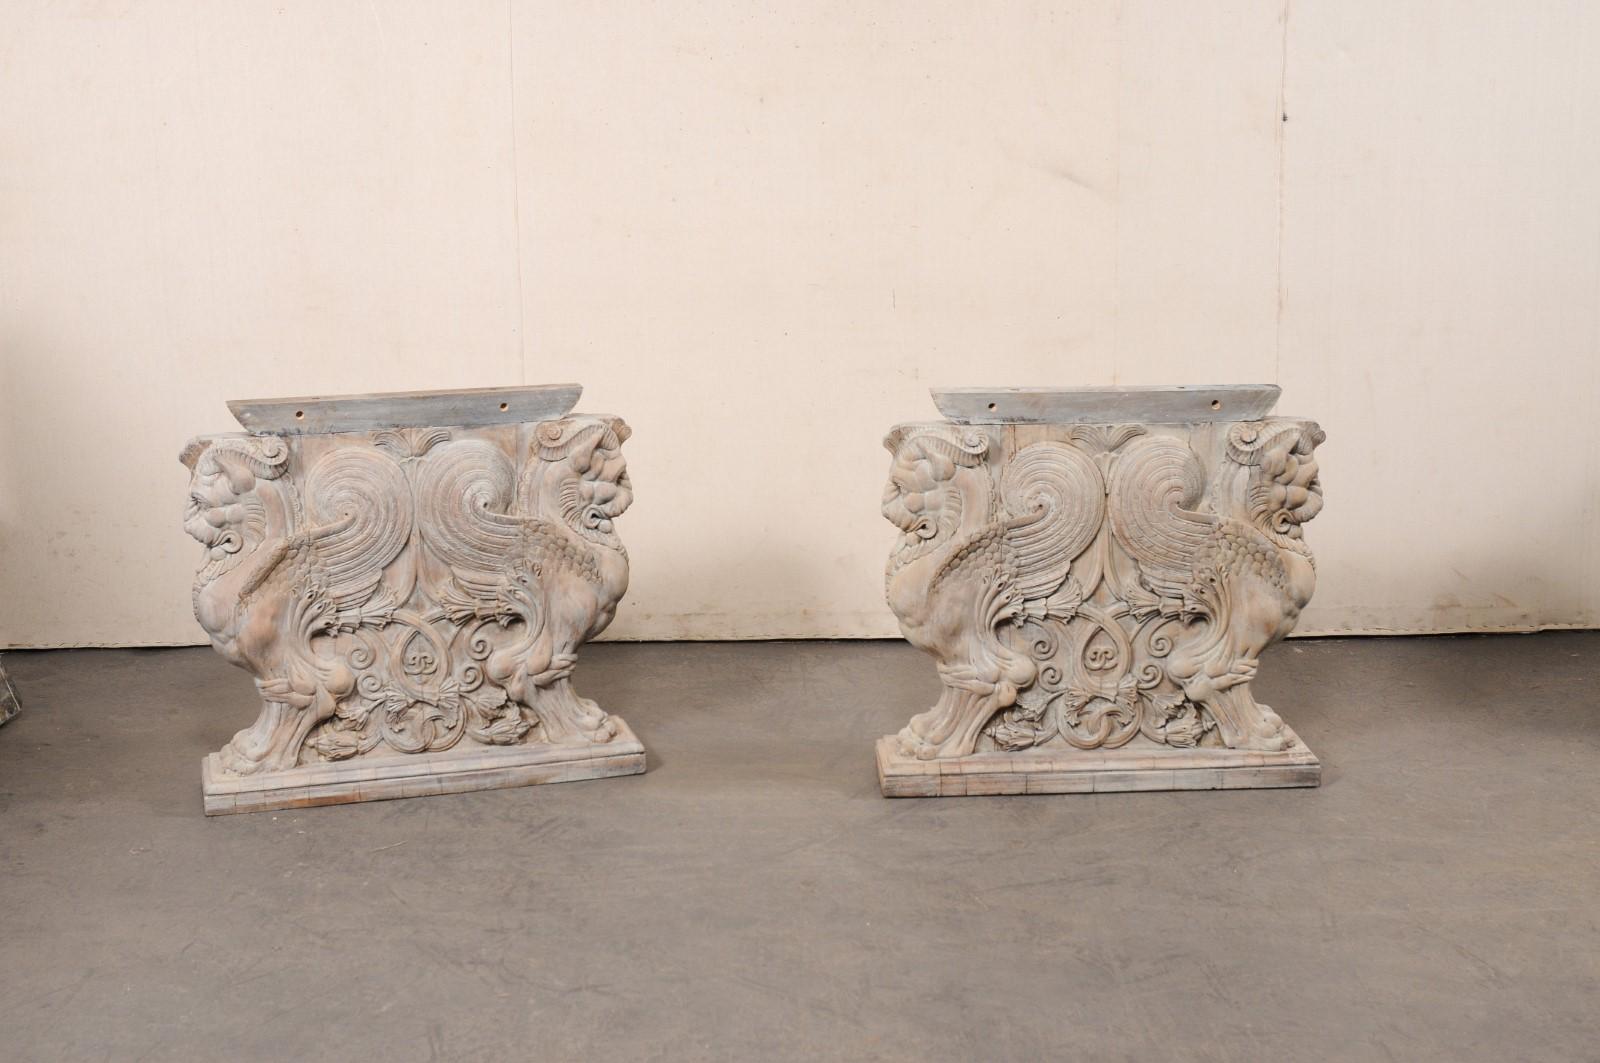 A fabulous French pair of wall consoles, with griffin carved-wood pedestal bases, from the turn of the 19th and 20th century. These antique tables from France each have a rectangular-shaped top, which is raised upon a wood base that features a pair